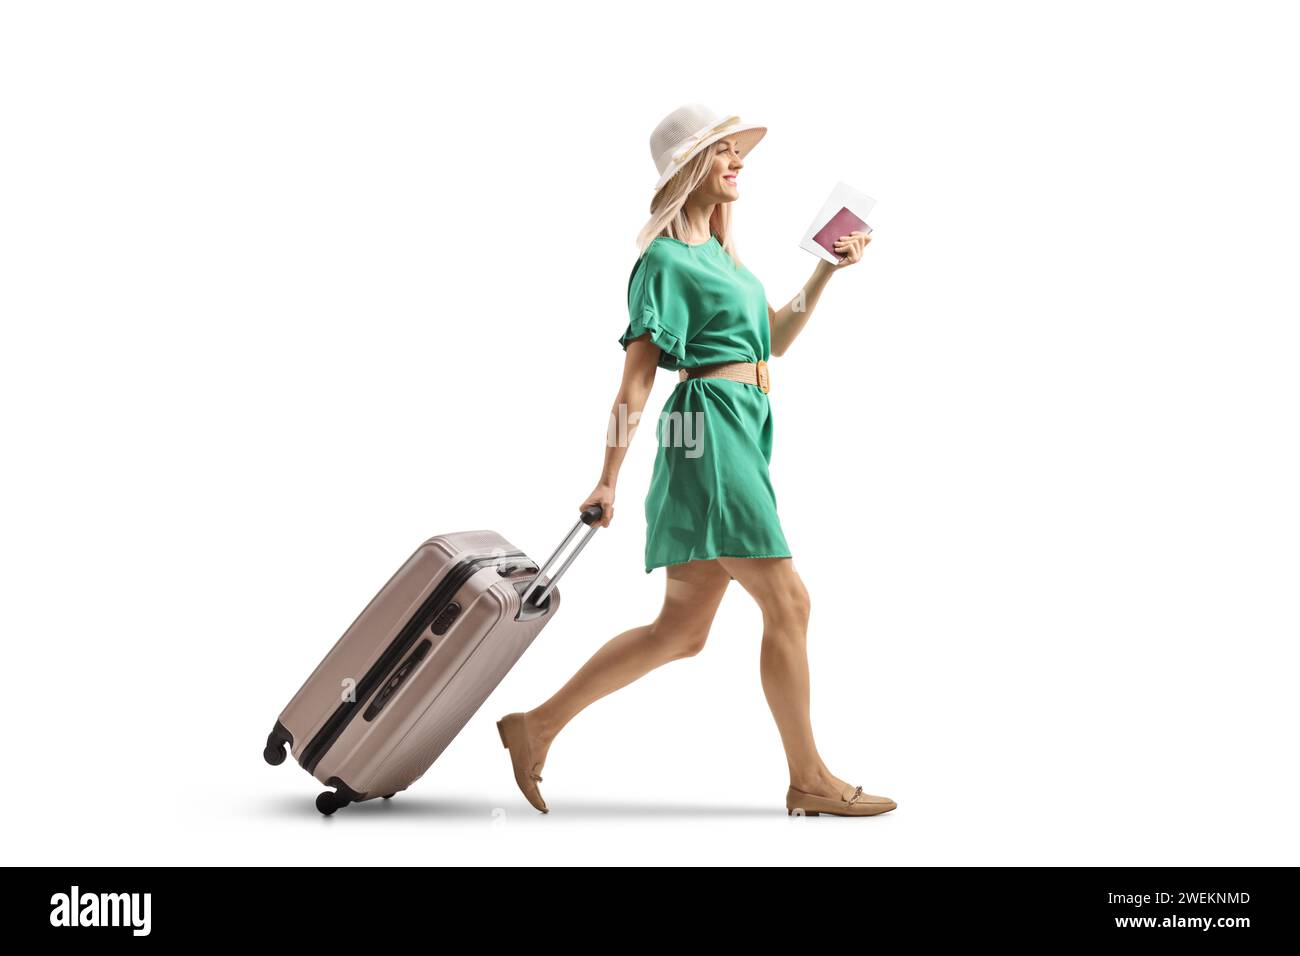 Young woman in a green dress pulling a suitcase and holding a passport isolated on white background Stock Photo